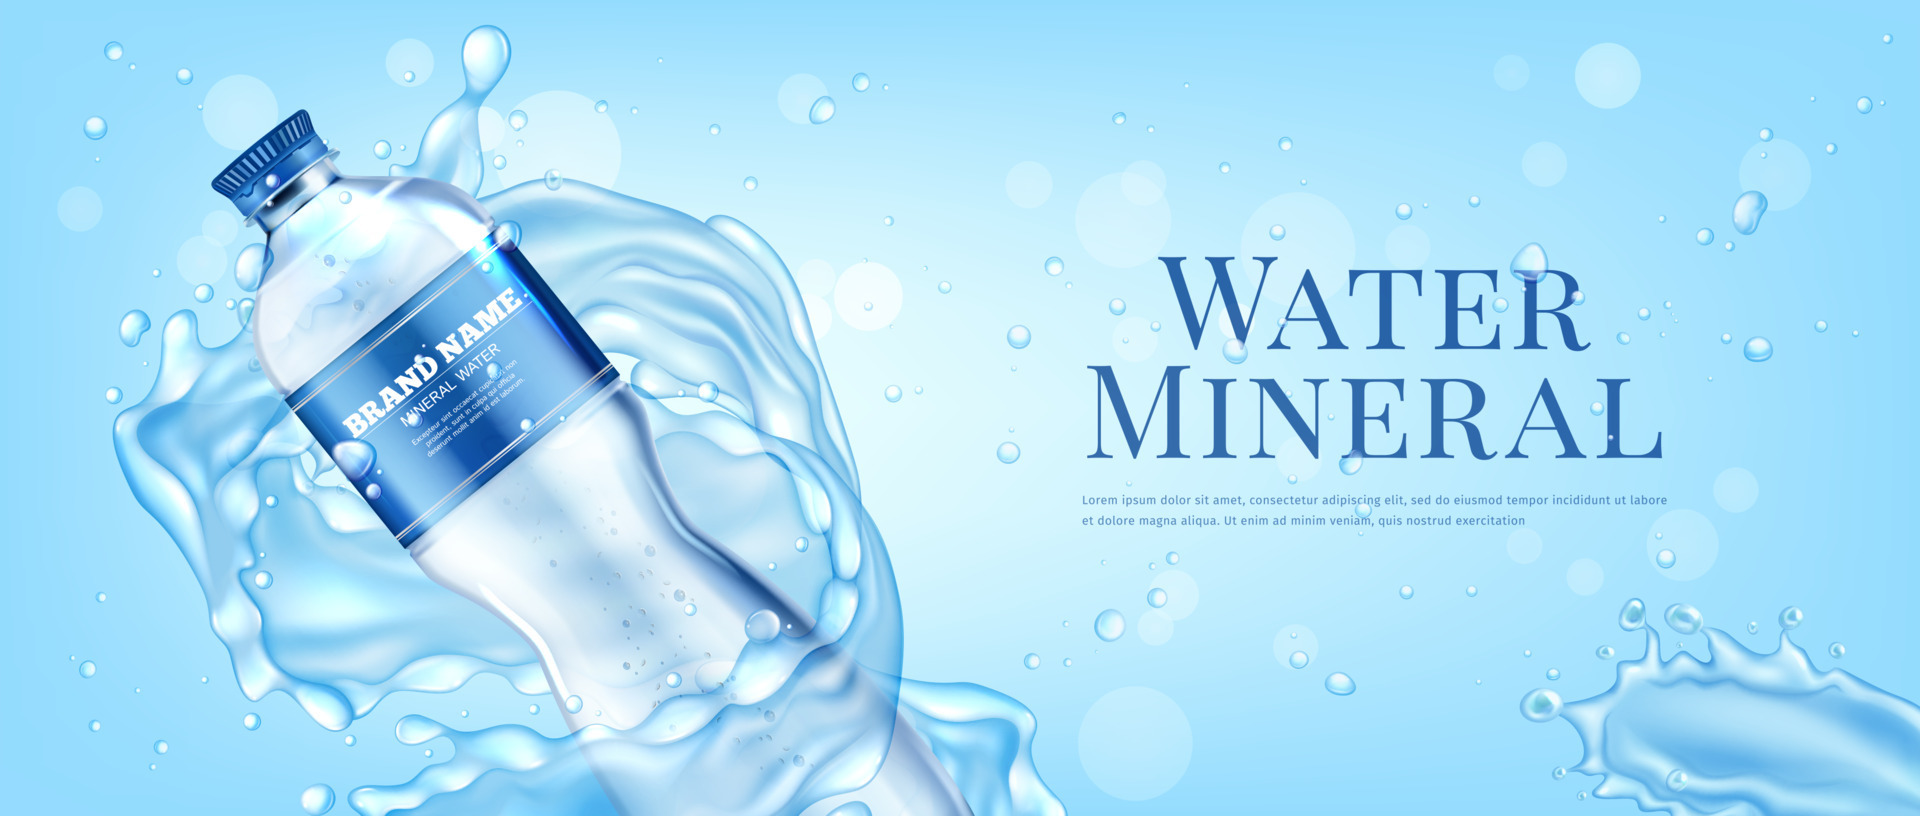 A pure water bottle on transparent background Vector Image